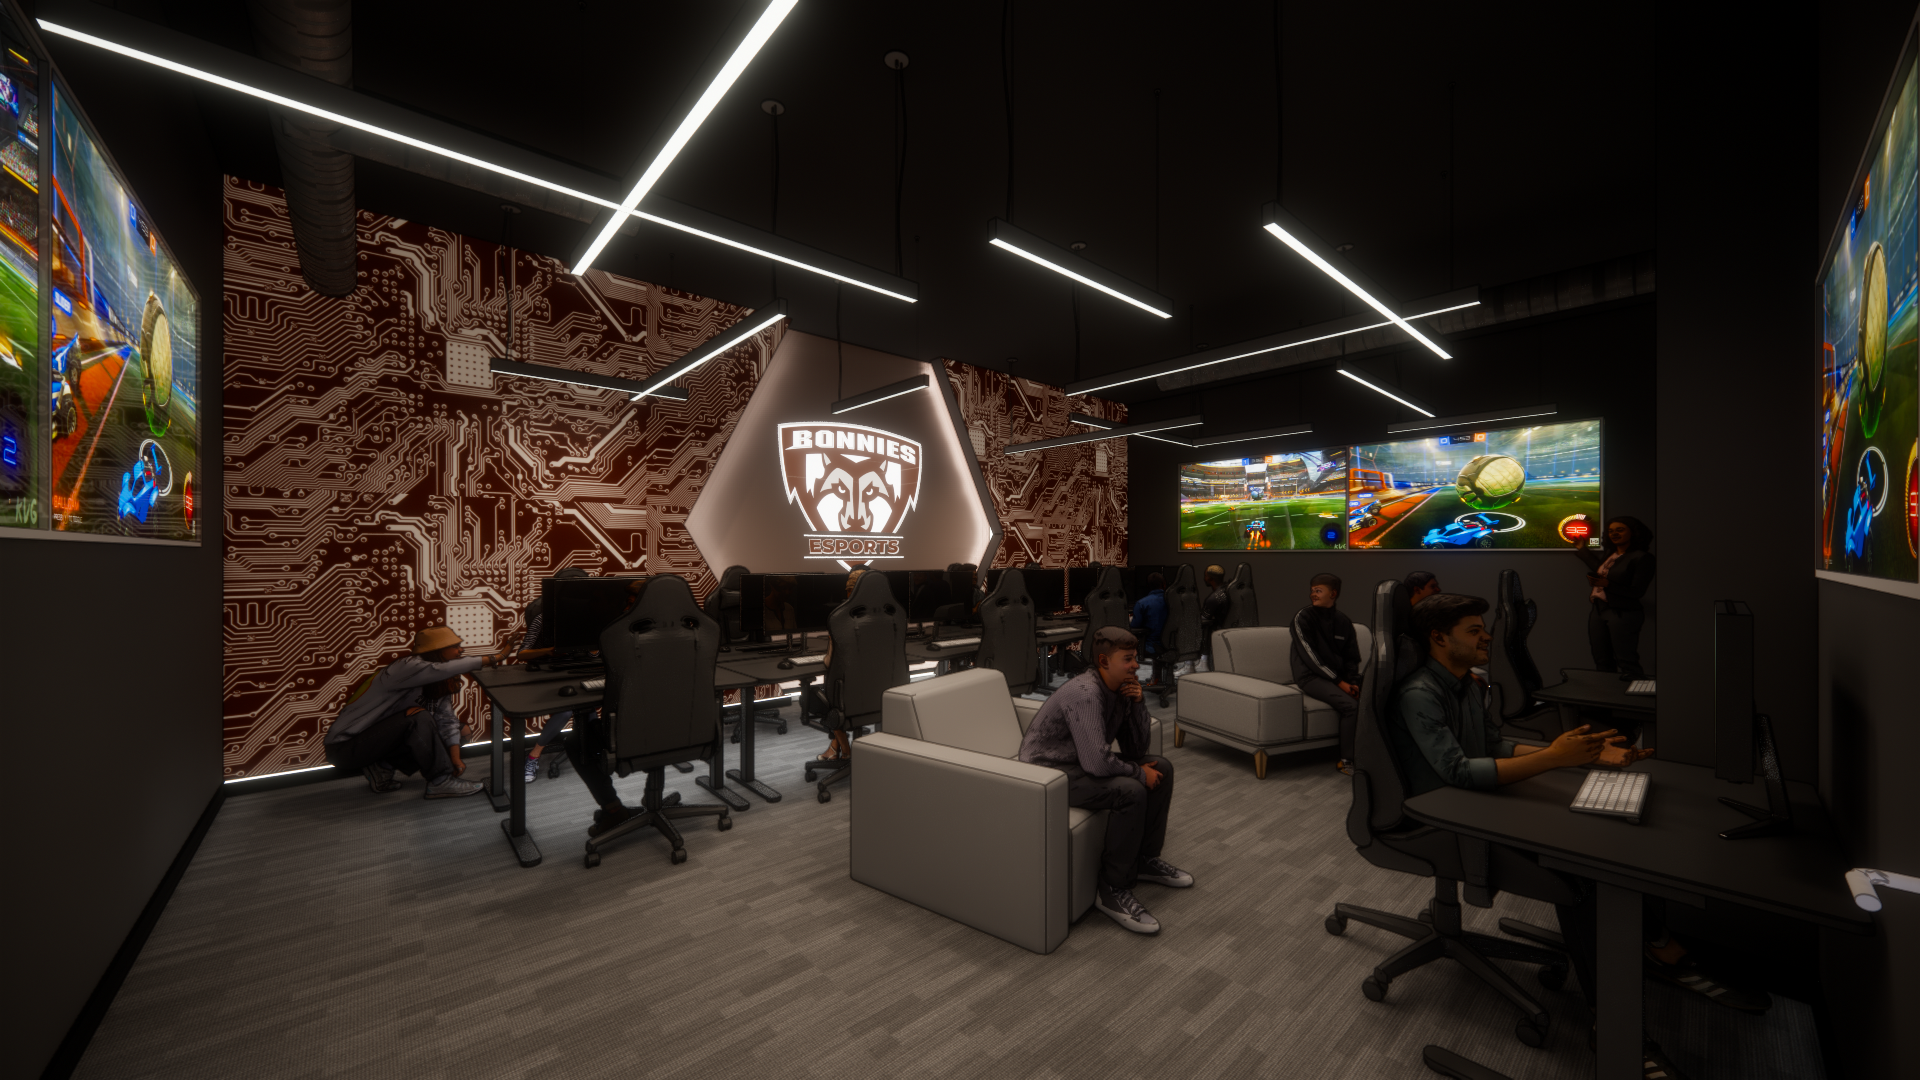 Image is a rendering of St. Bonaventure's esports gaming room with computer stations and lounging chairs located nearby with screens on the walls.